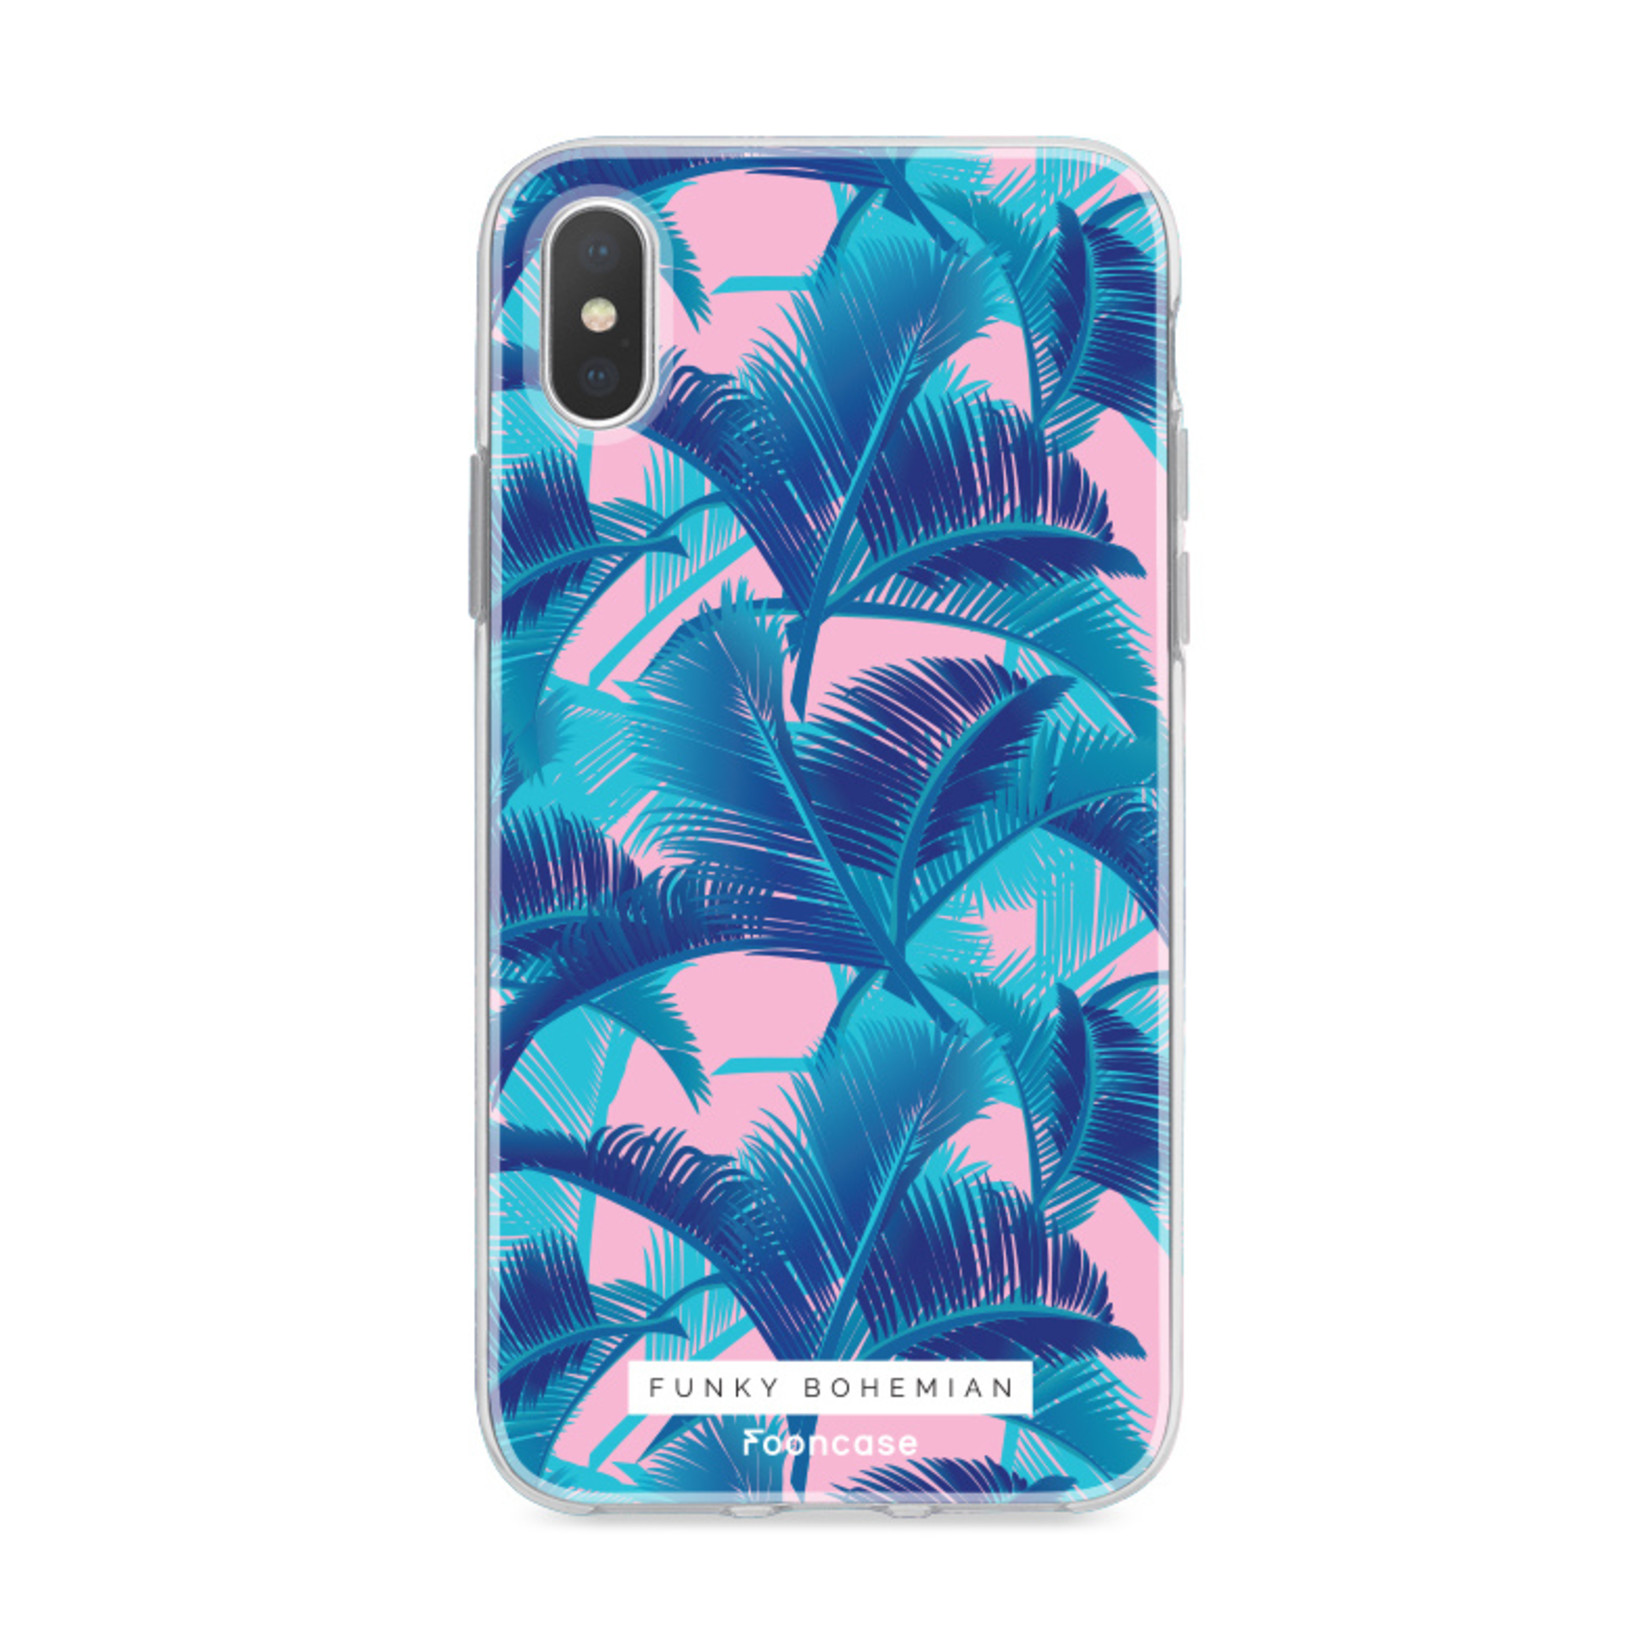 FOONCASE iPhone XS Max hoesje TPU Soft Case - Back Cover - Funky Bohemian / Blauw Roze Bladeren